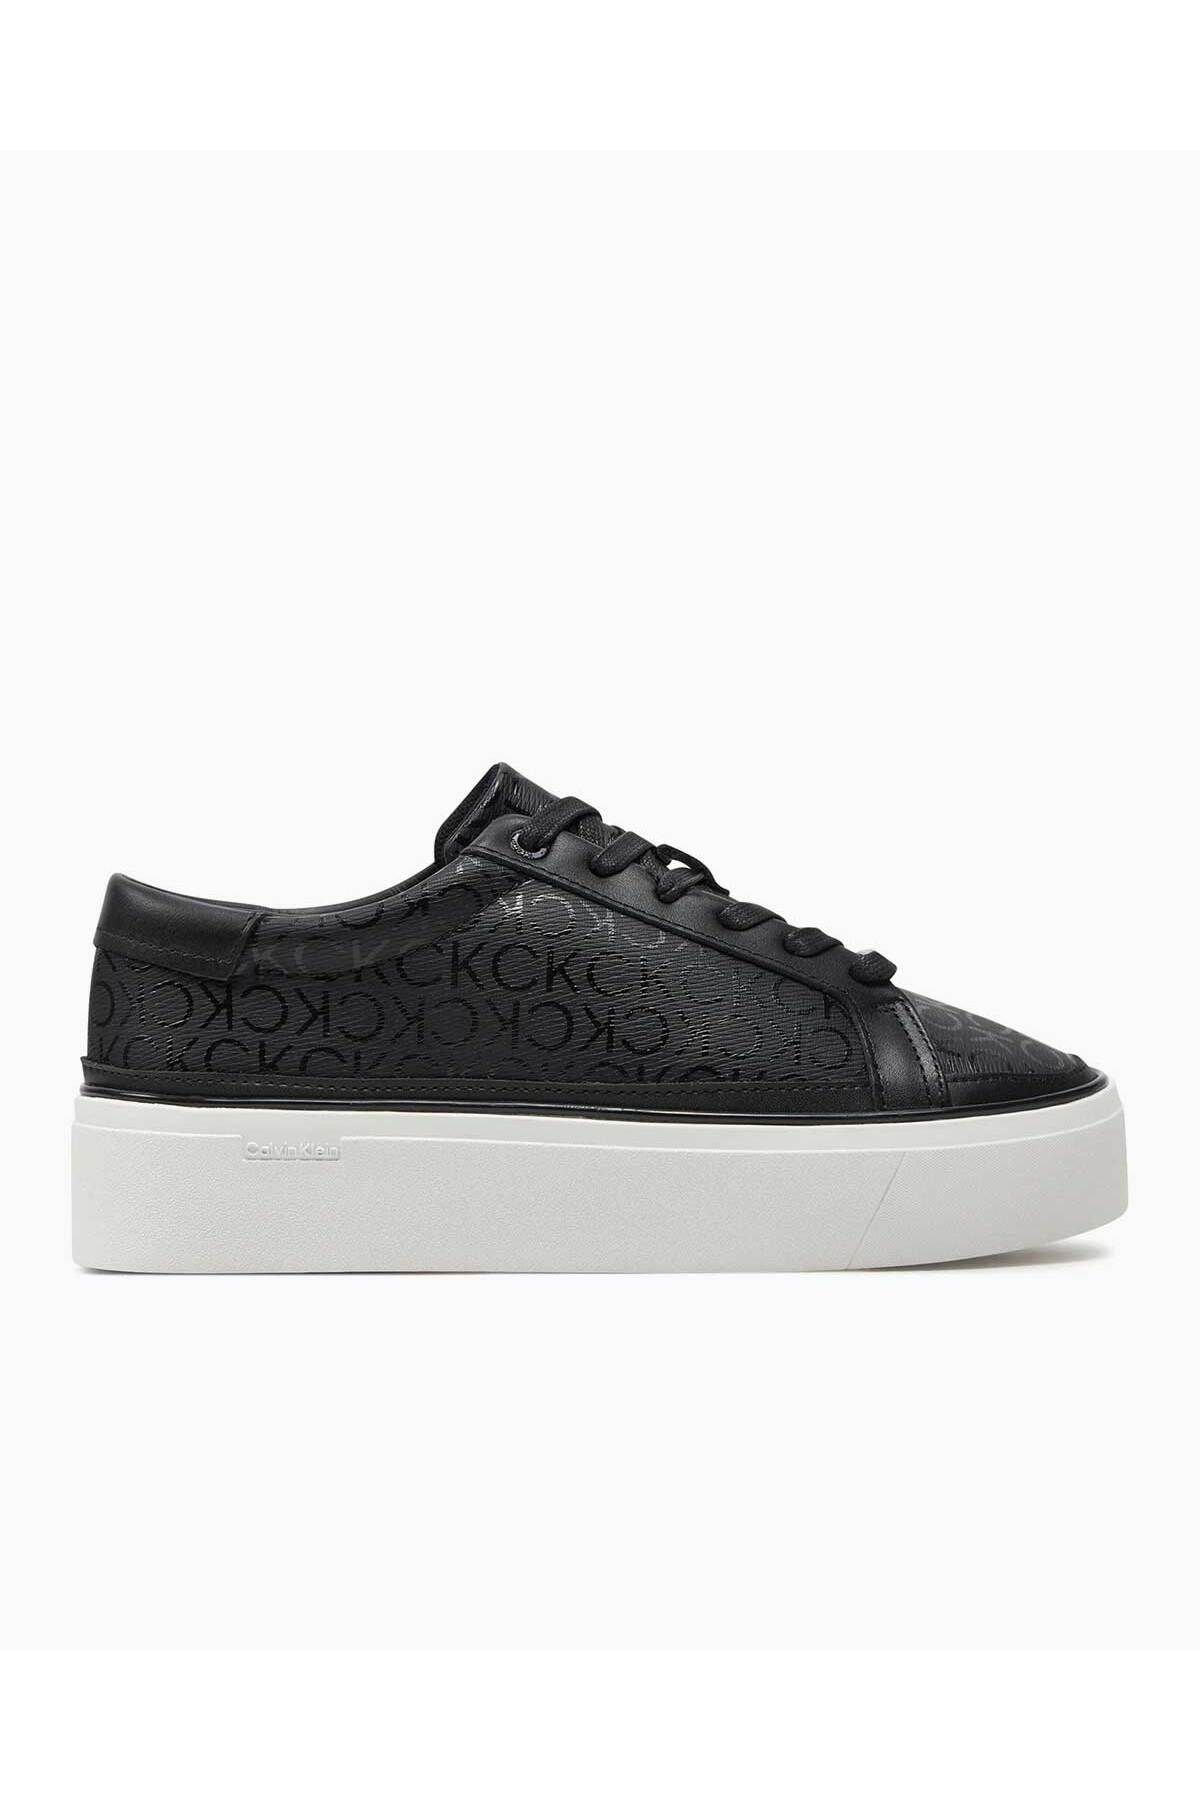 Calvin Klein Flatform Cup Lace Up Mono Sneakers